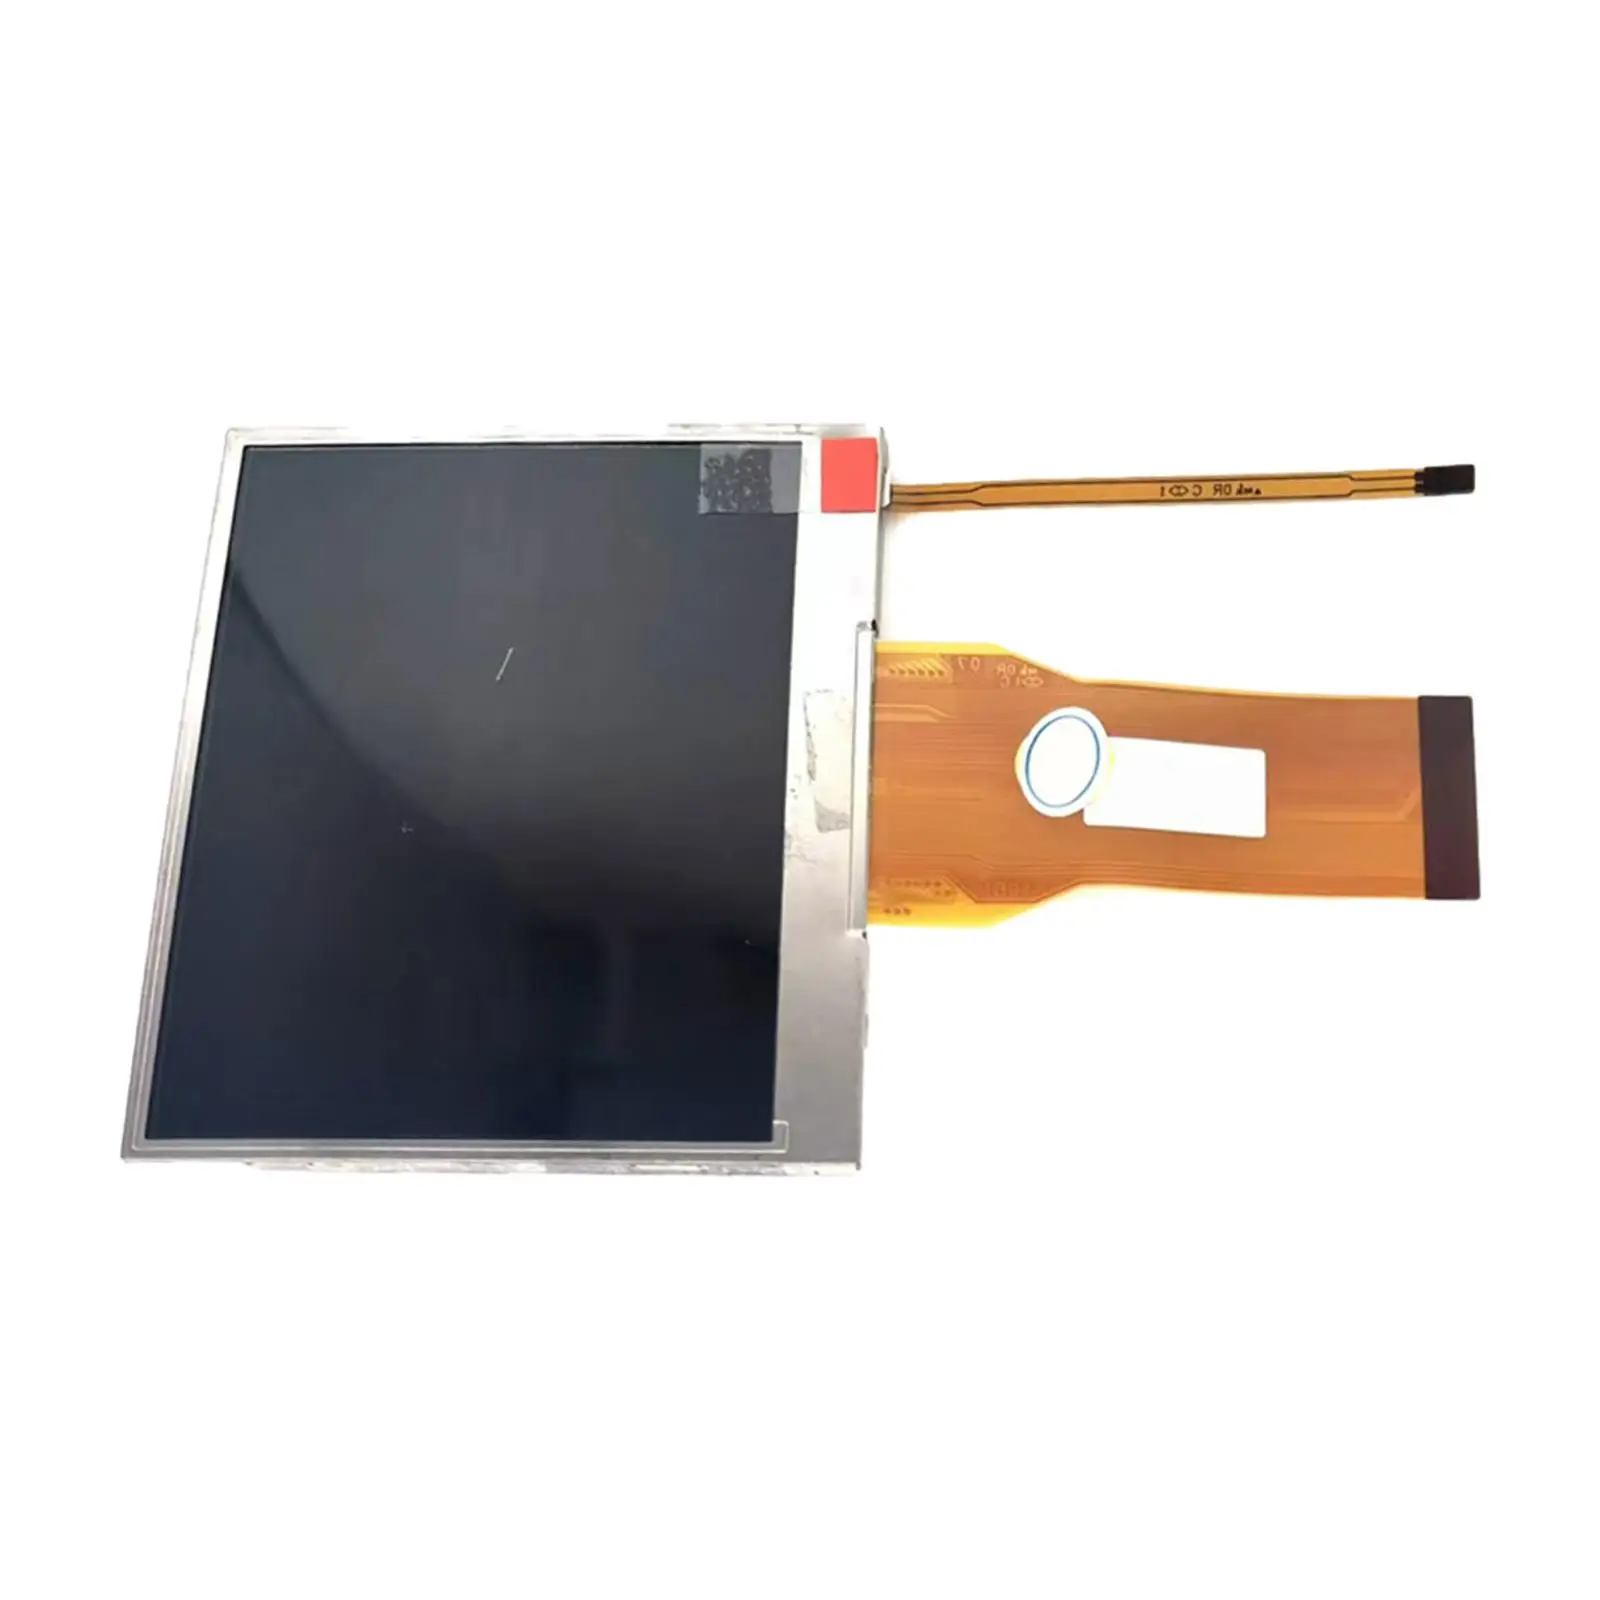 LCD Display Screen Replaces Digital Camera Repair Part Accessories Durable Easy Installation Professional LCD Screen for D7000